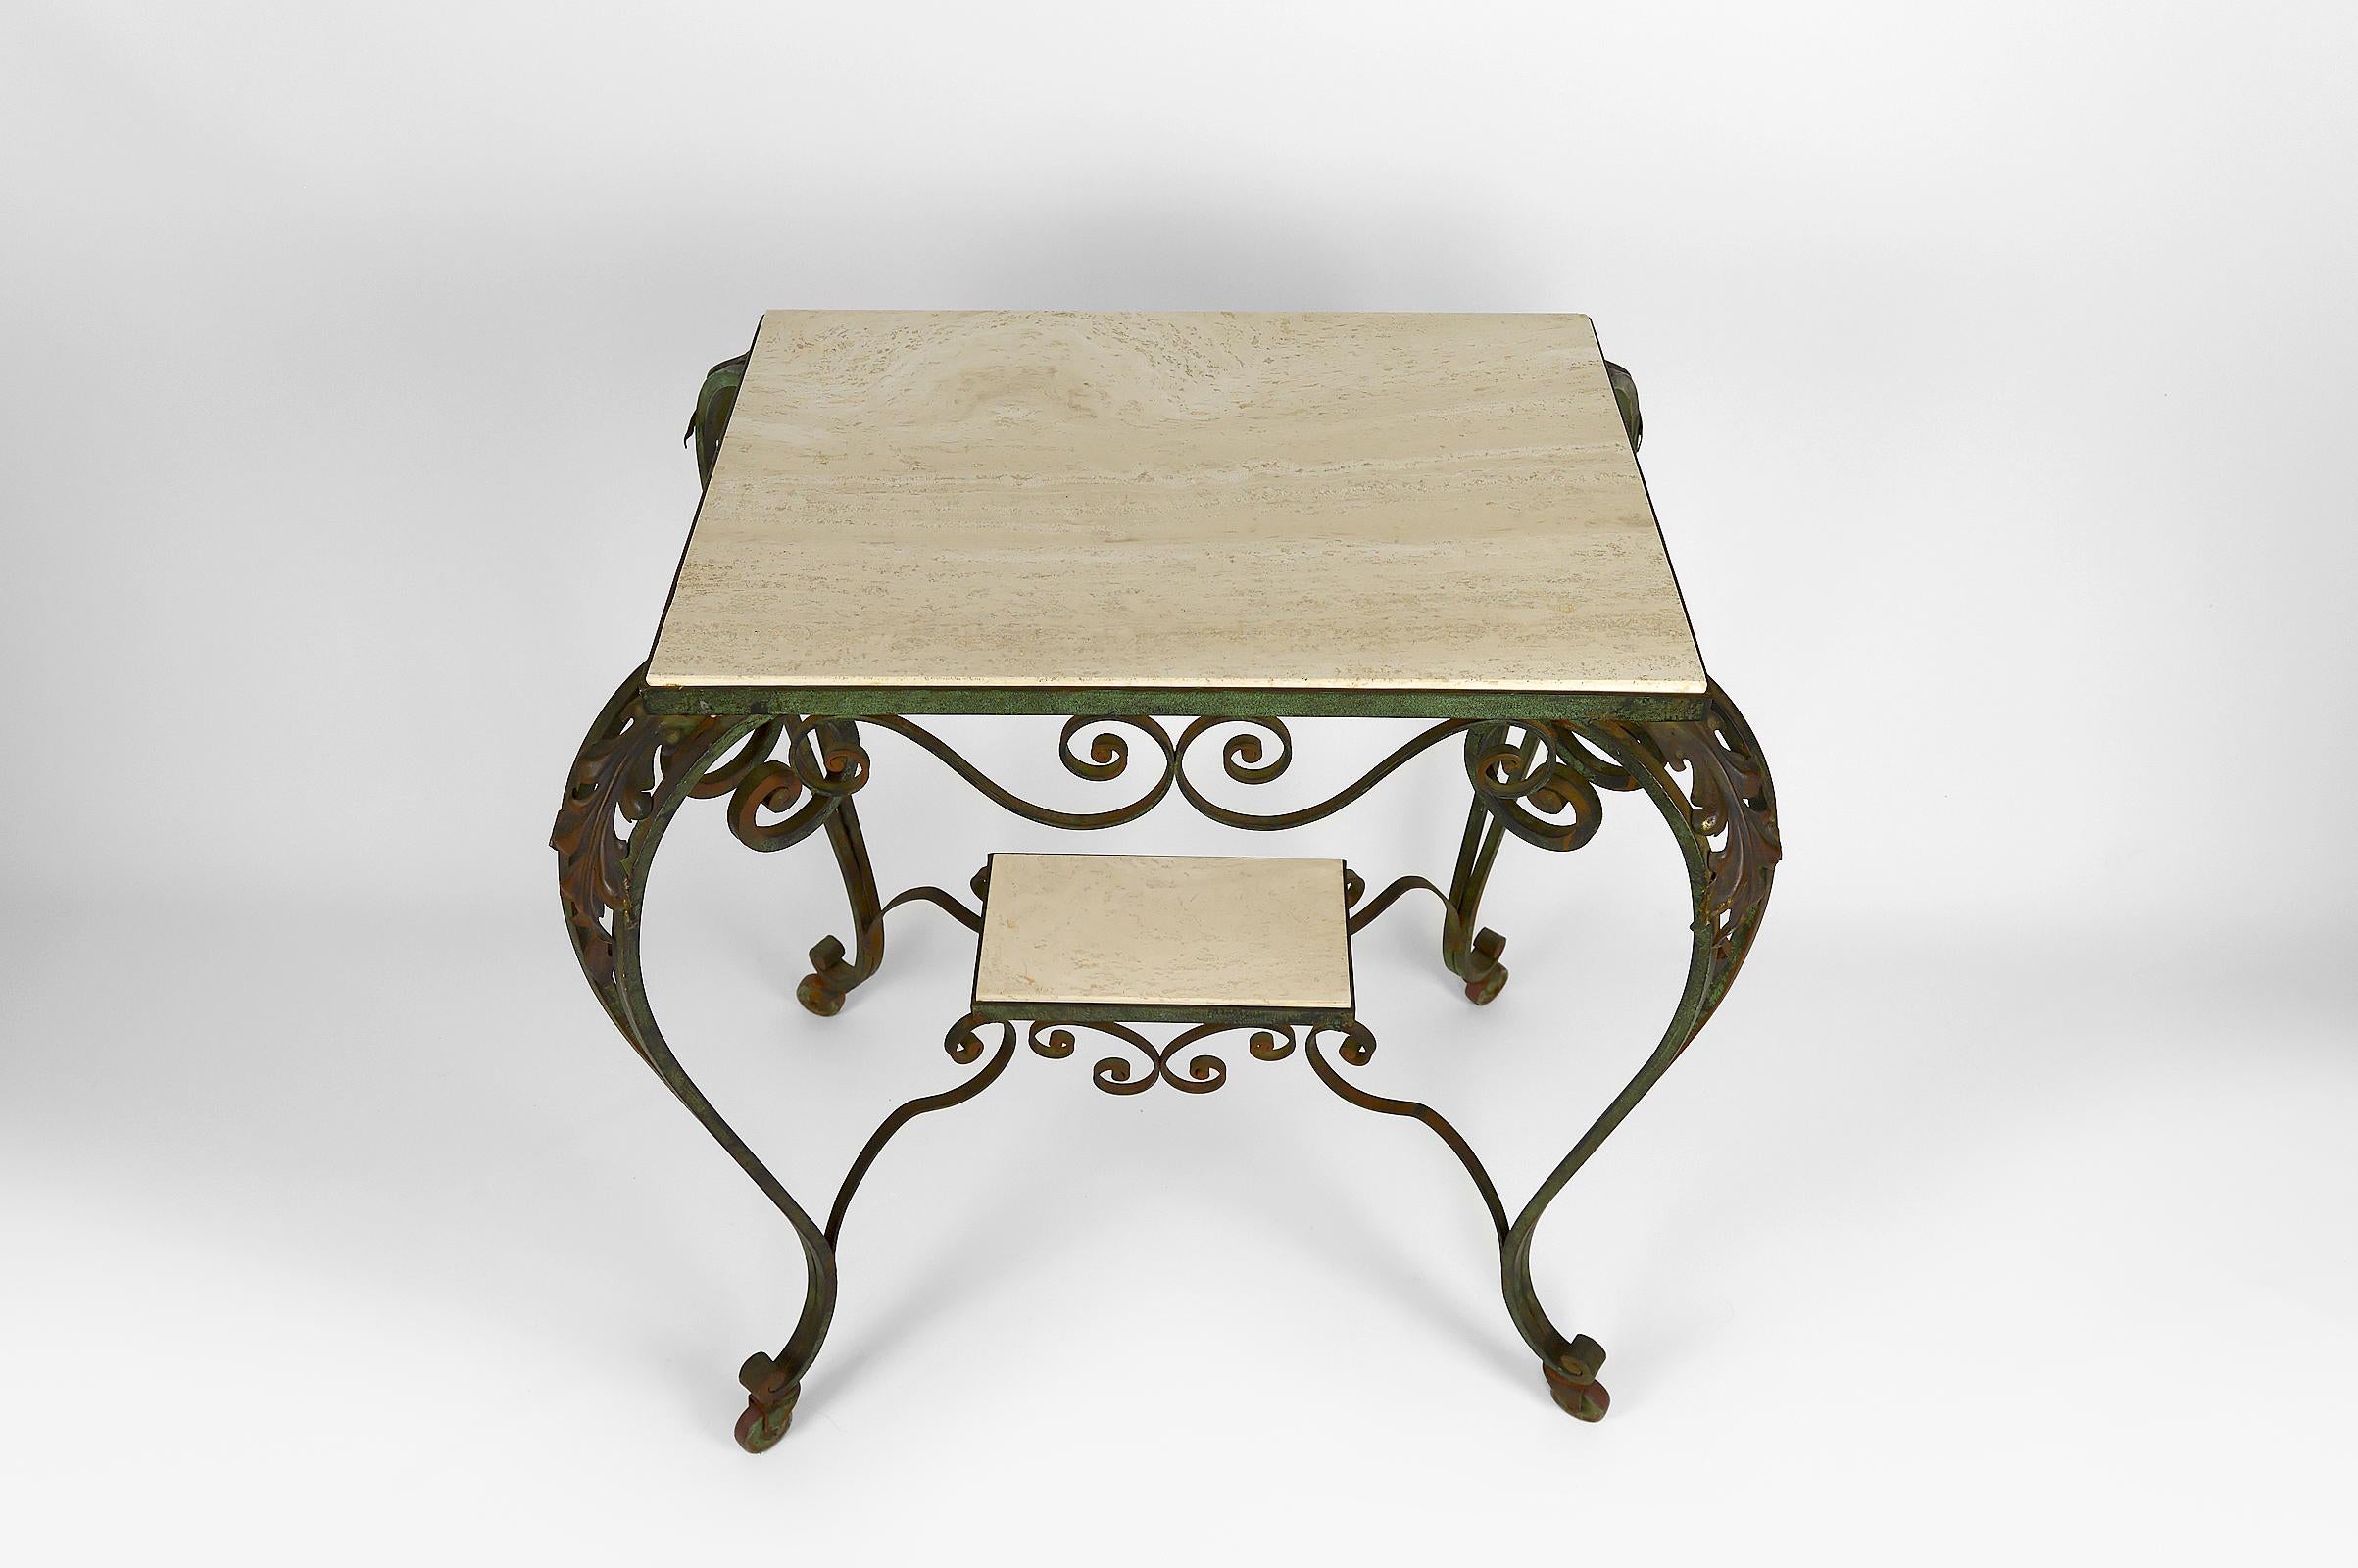 Art Deco Rolling Service Table in Wrought Iron and Travertine, France, 1940s For Sale 6